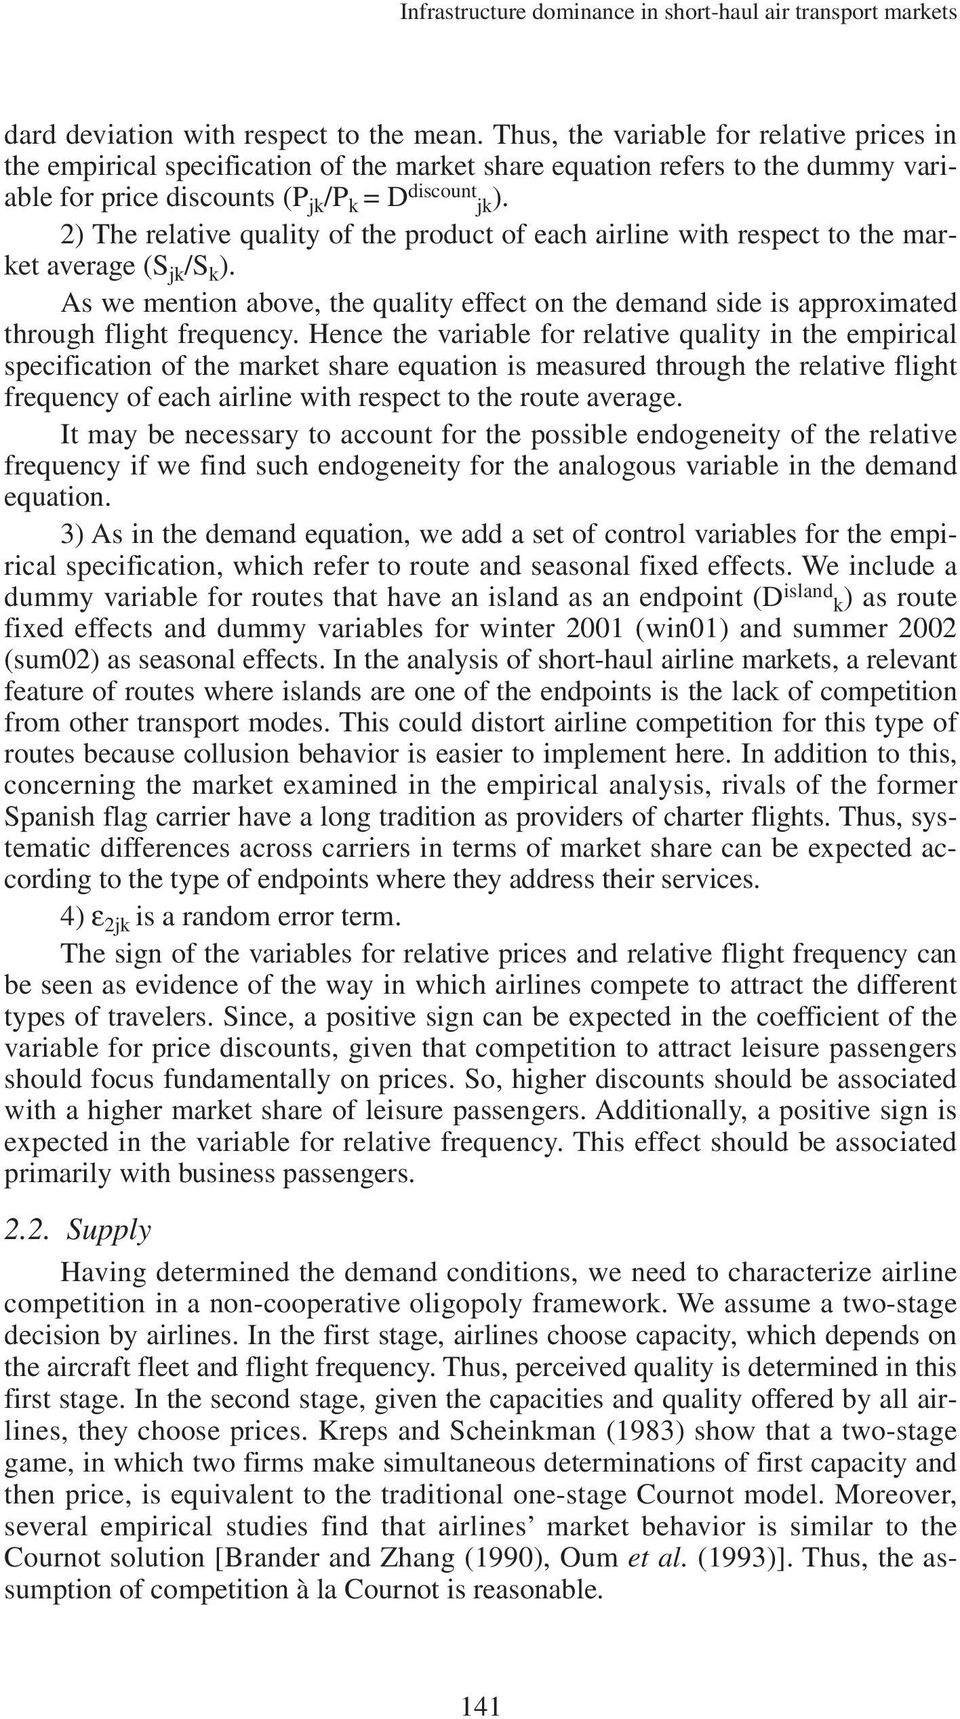 2) The relative quality of the product of each airline with respect to the market average (S jk /S k ).